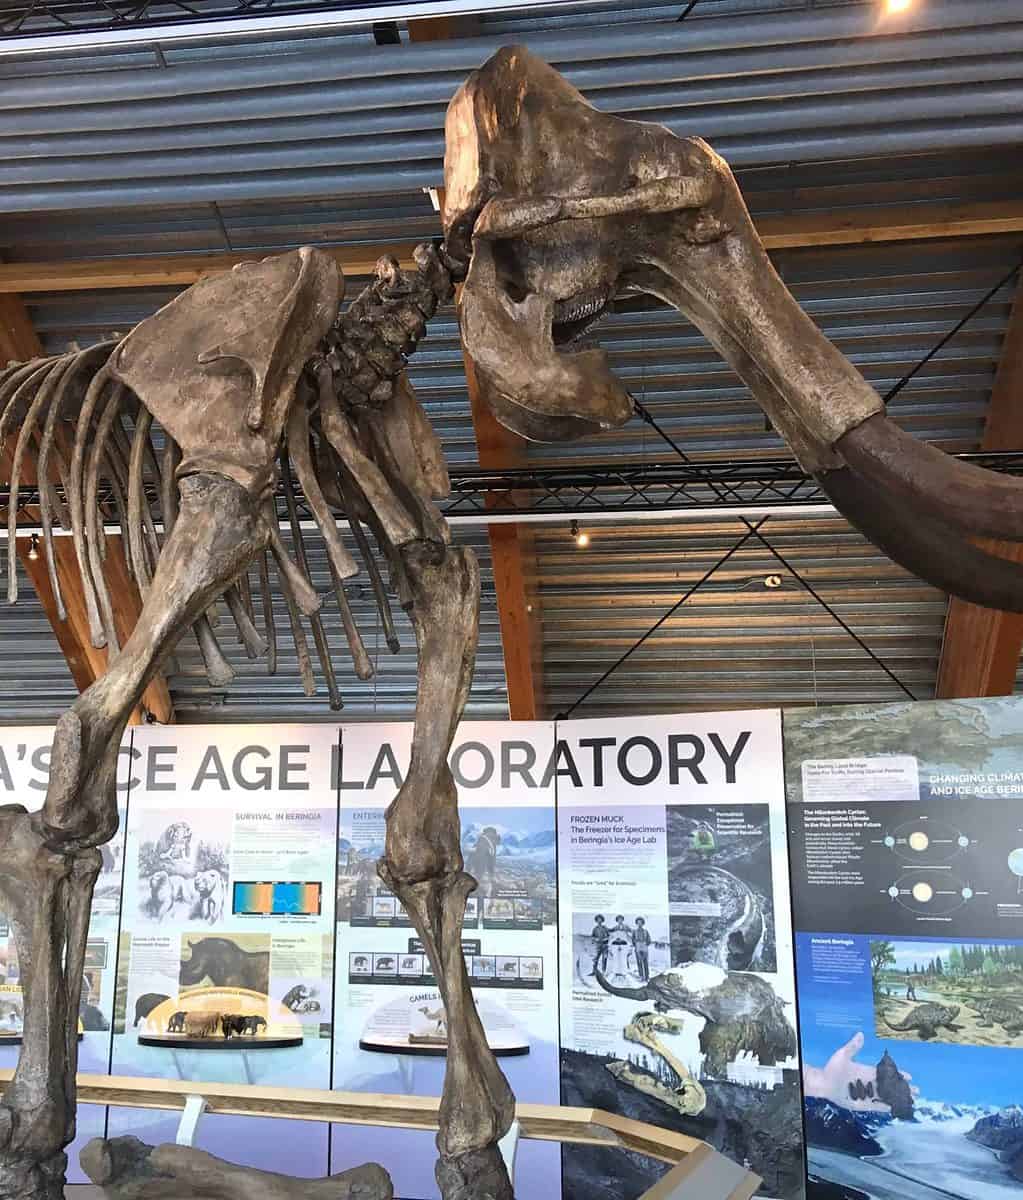 A wooly mammoth skeleton on display